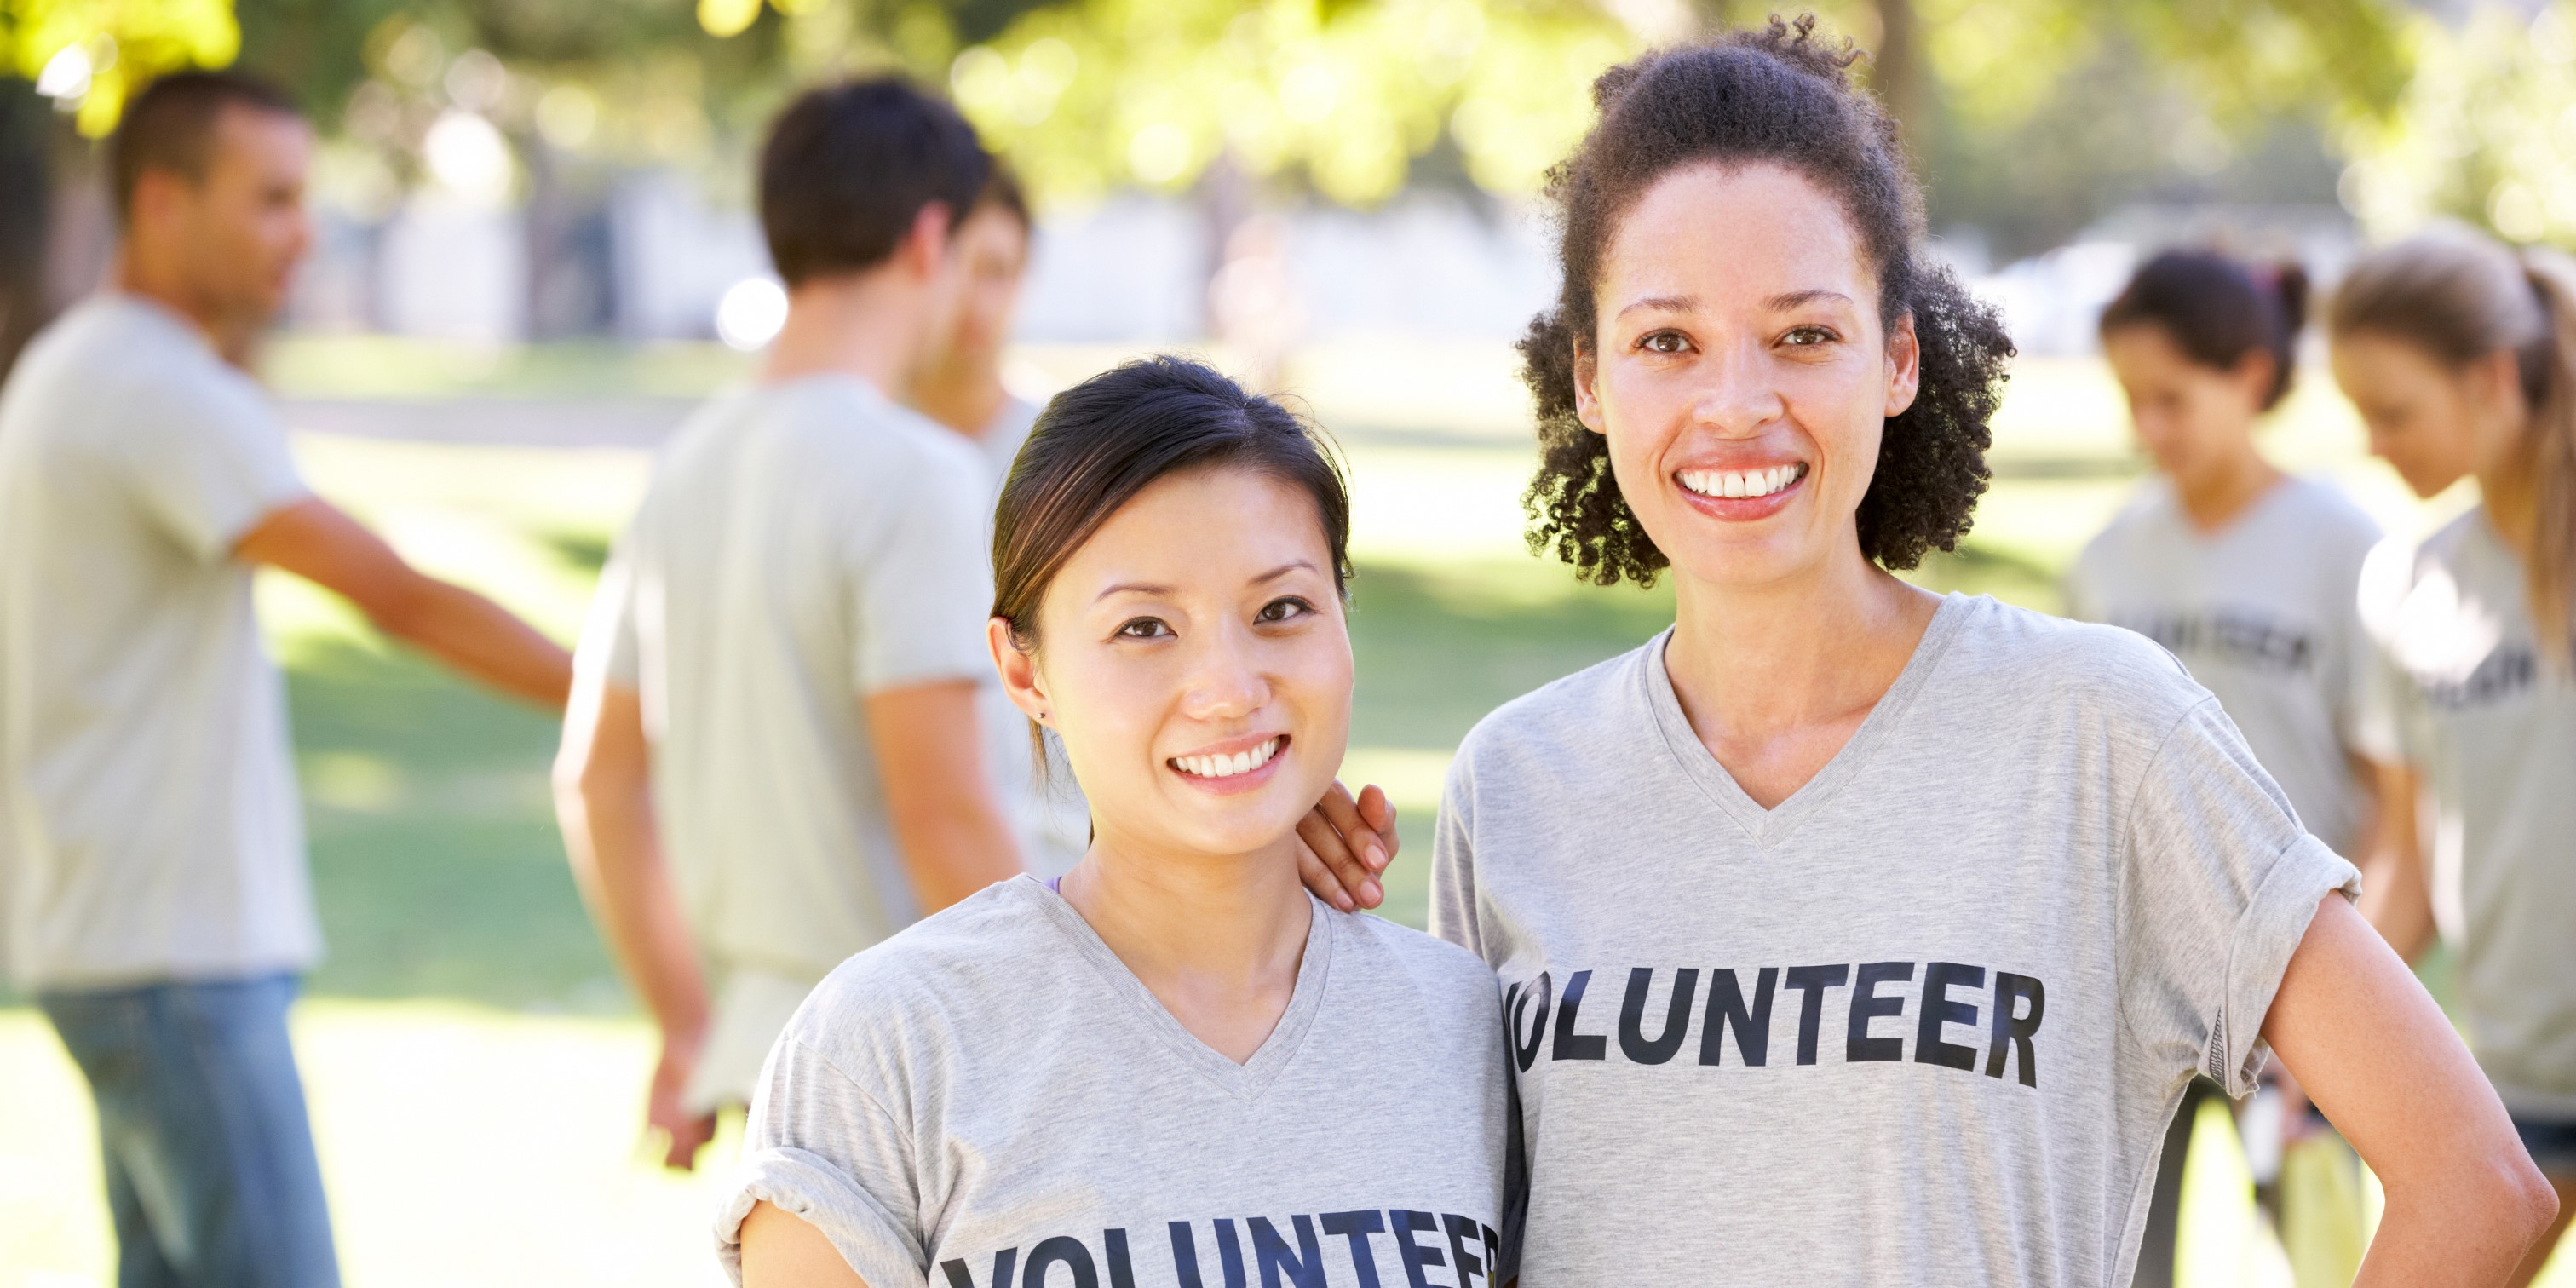 Women with volunteer t-shirts